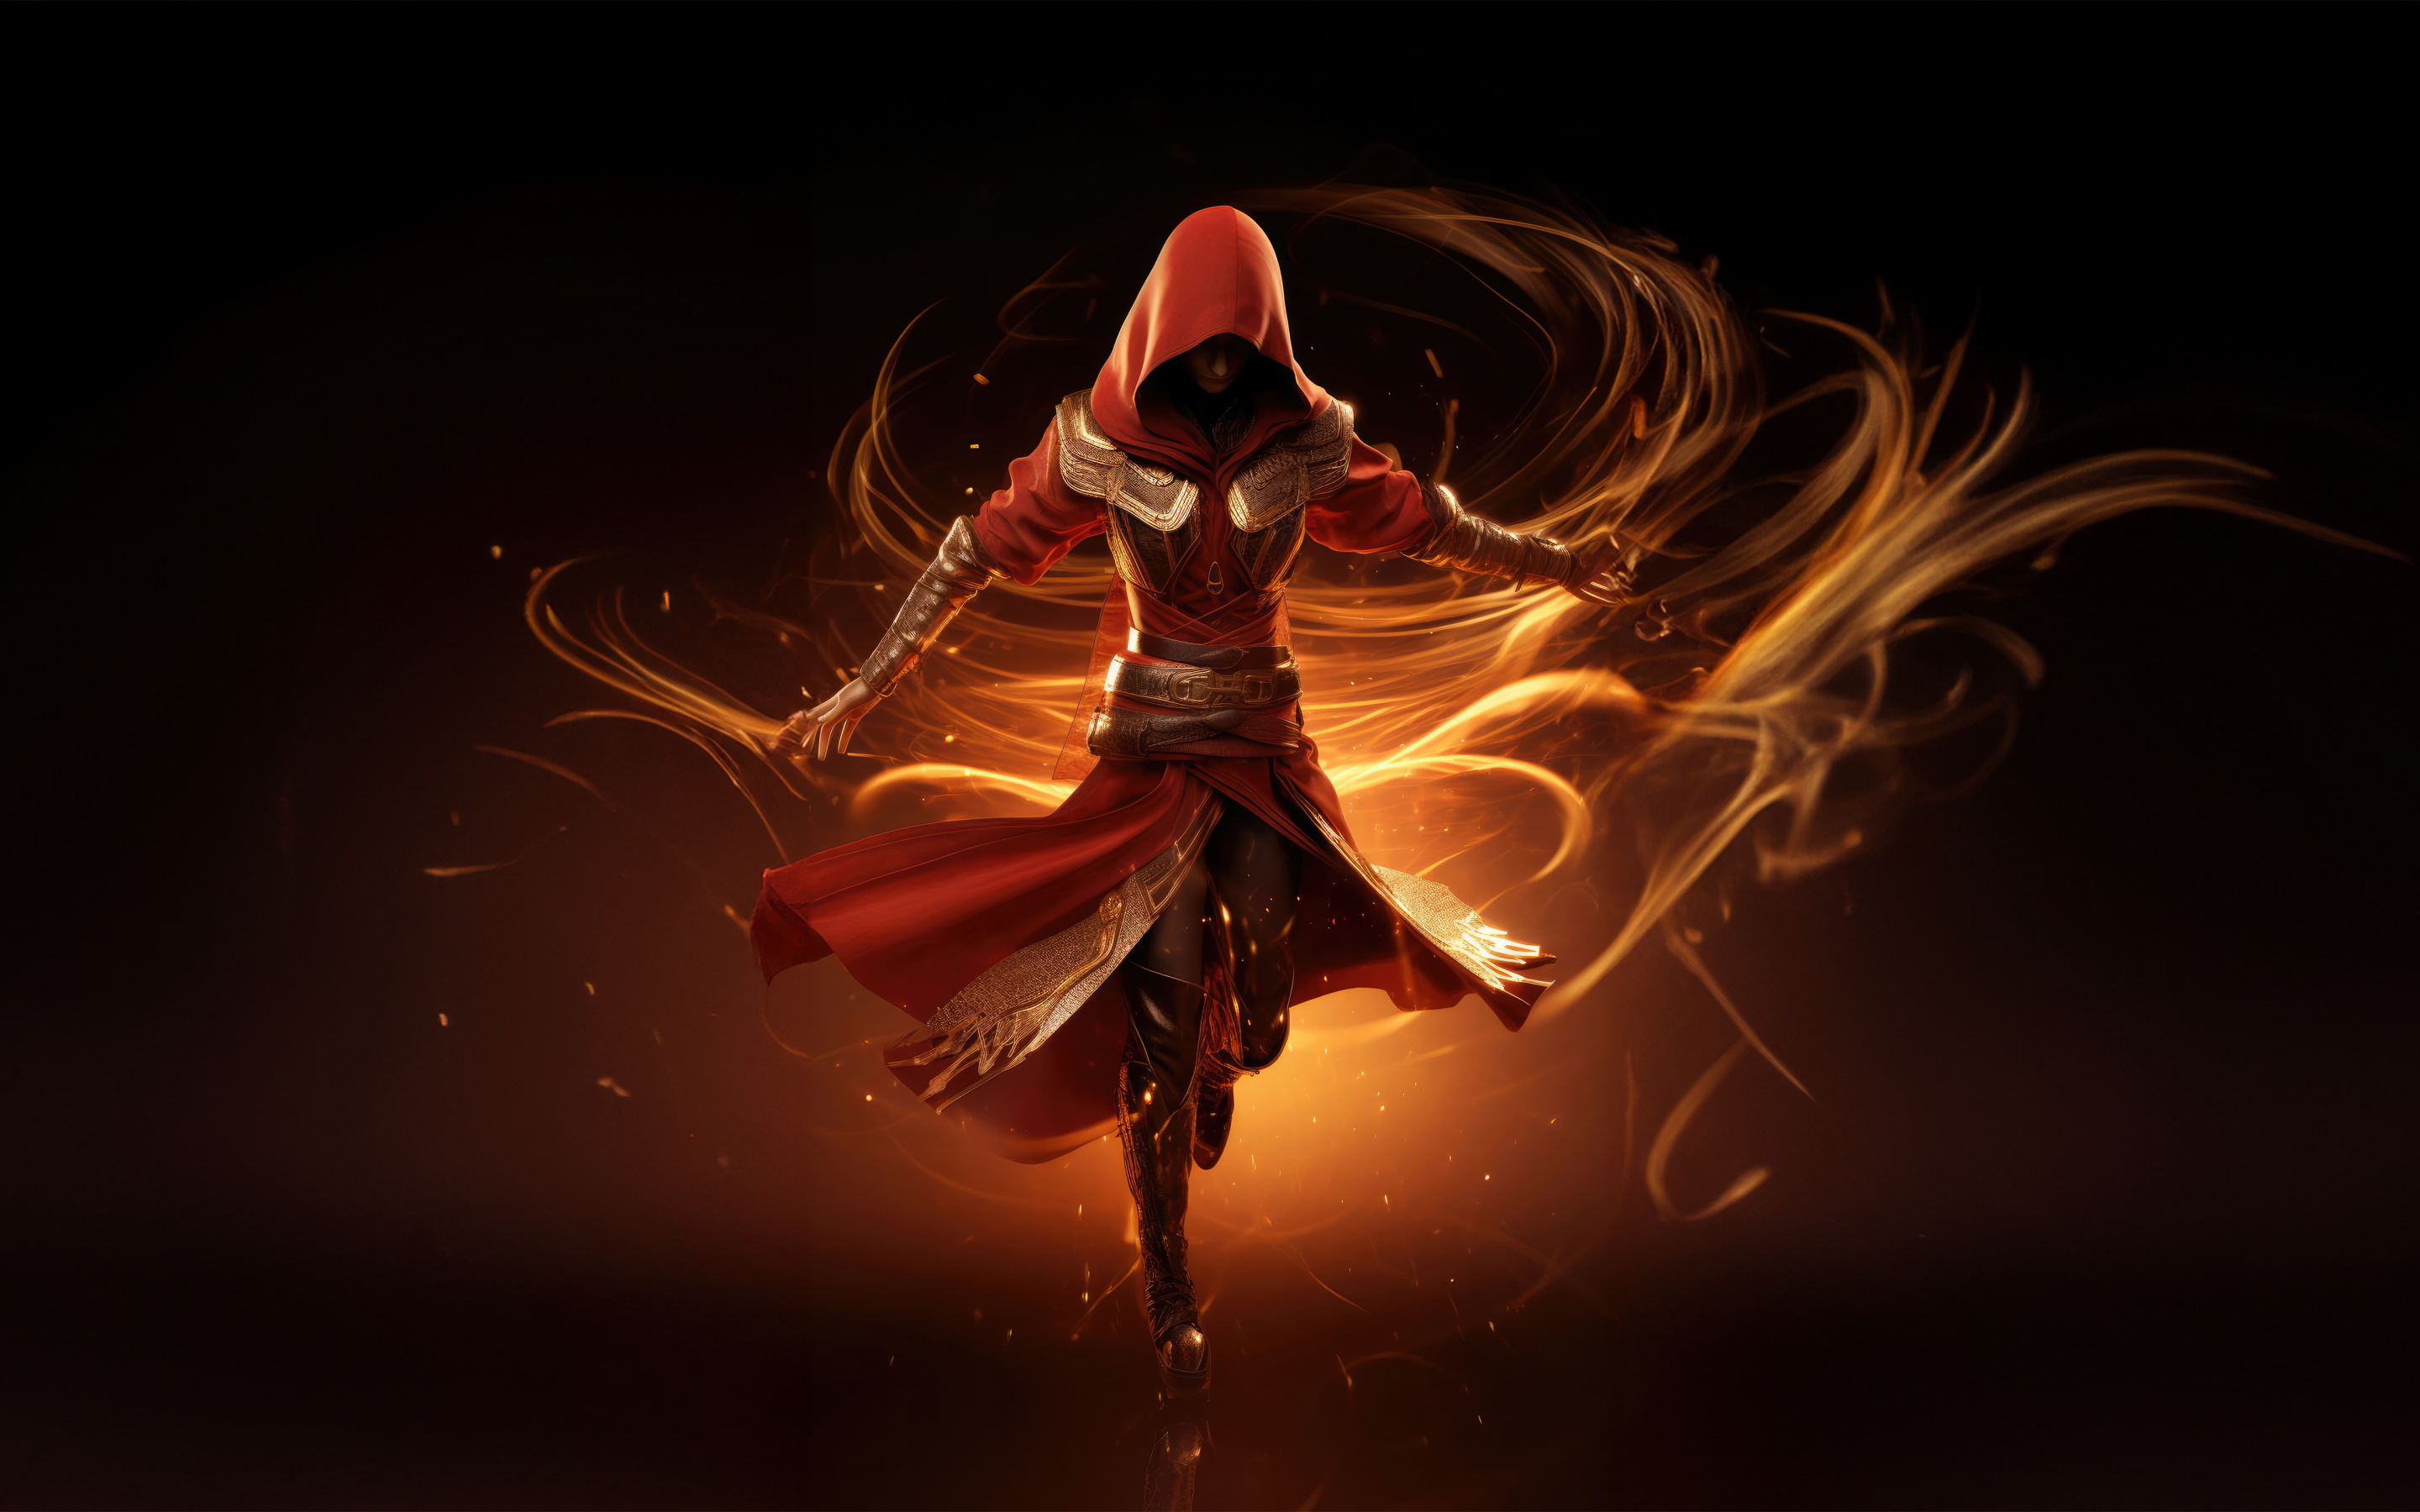 Assassin girl ignites the night with flames, art, 2880x1800 wallpaper